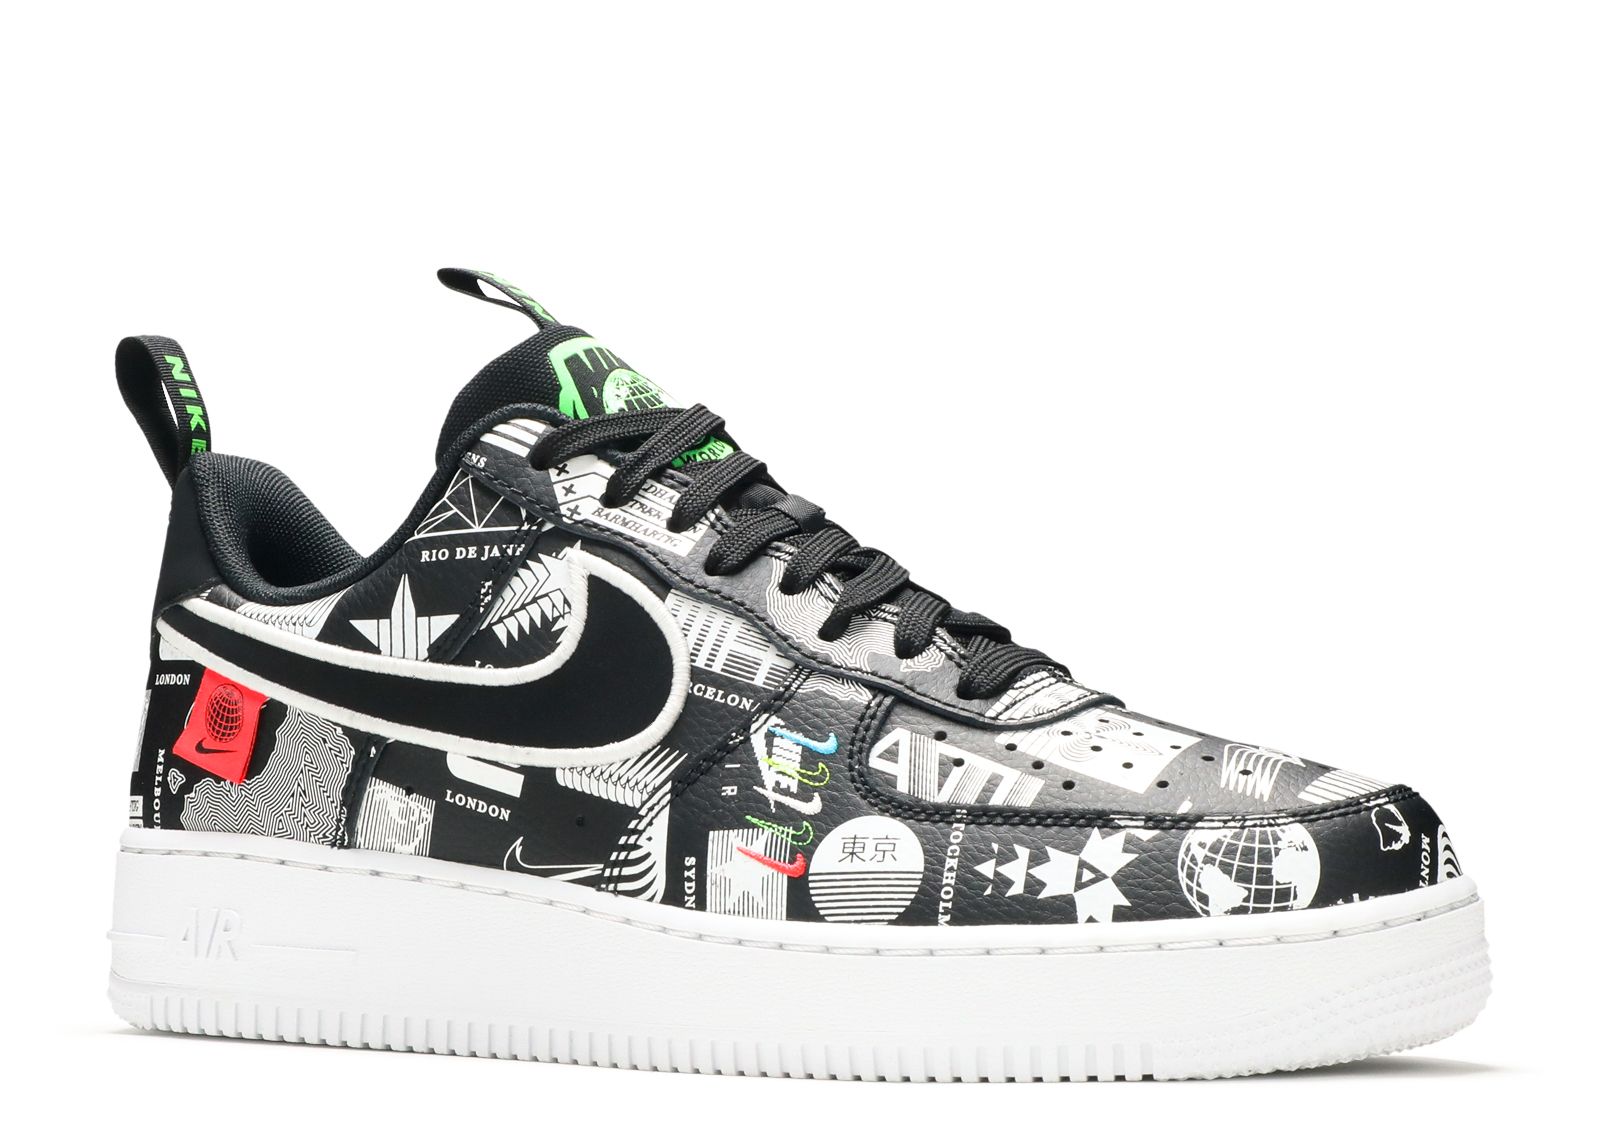 Nike Air Force 1 Low '07 World Wide Pack Black - Stadium Goods